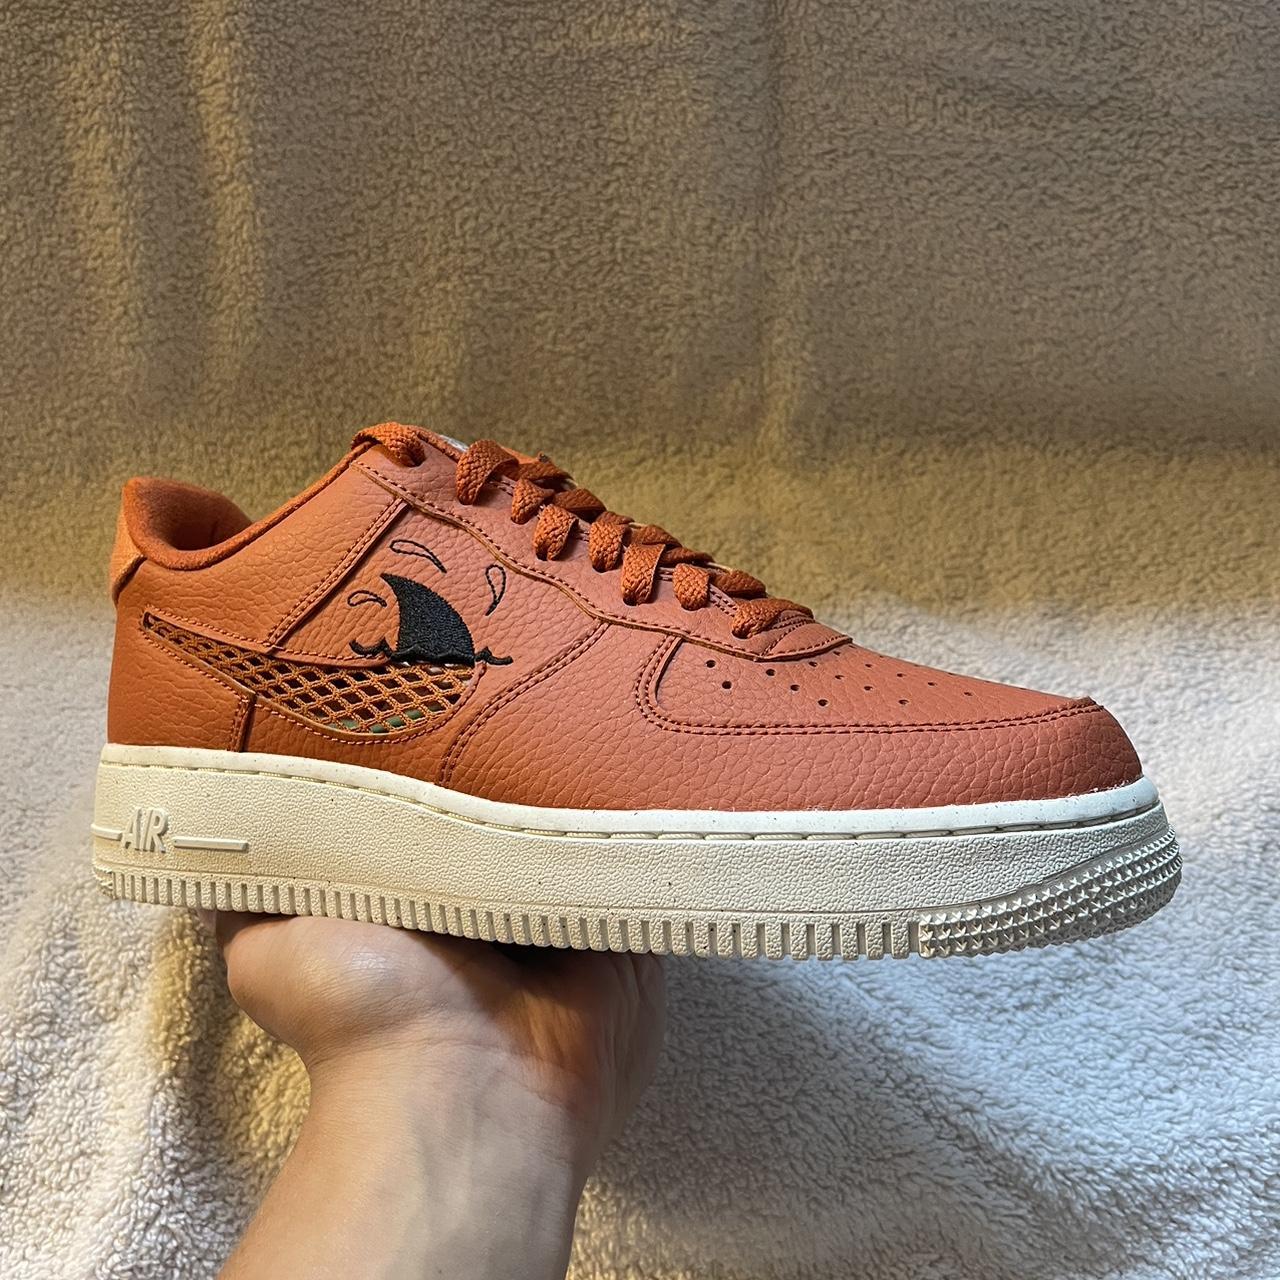 NIKE AIR FORCE 1 '07 LV8 2 TRAINERS SHOES UK 6 EUR - Depop